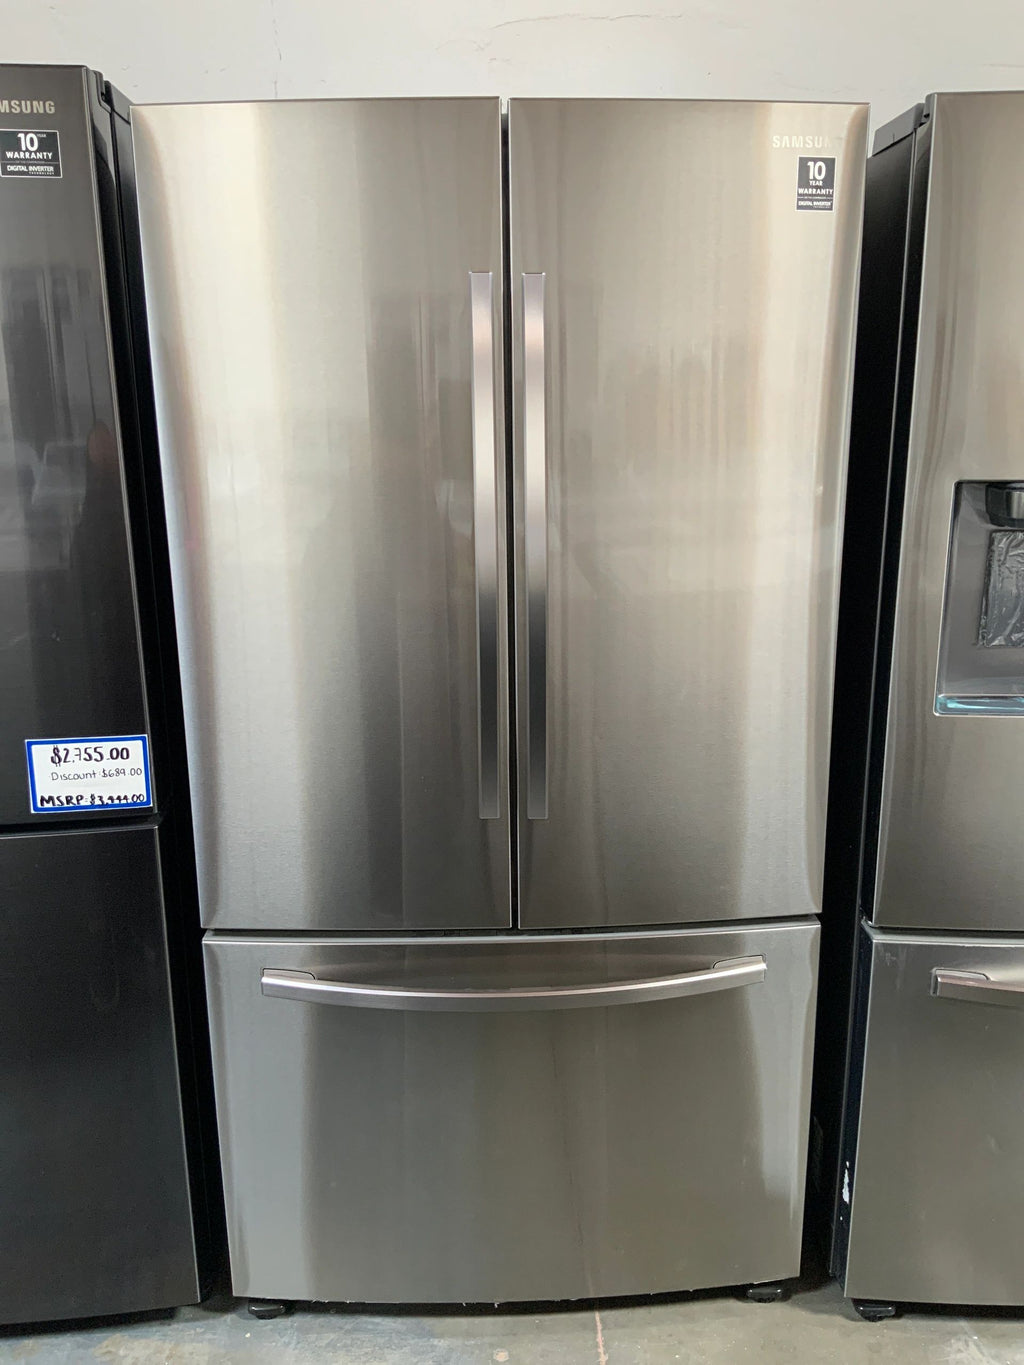 New Dent and Scratch. 28.2 cu. ft. French Door Refrigerator in Stainless Steel with internal water dispenser. Model: RF28T5101SR